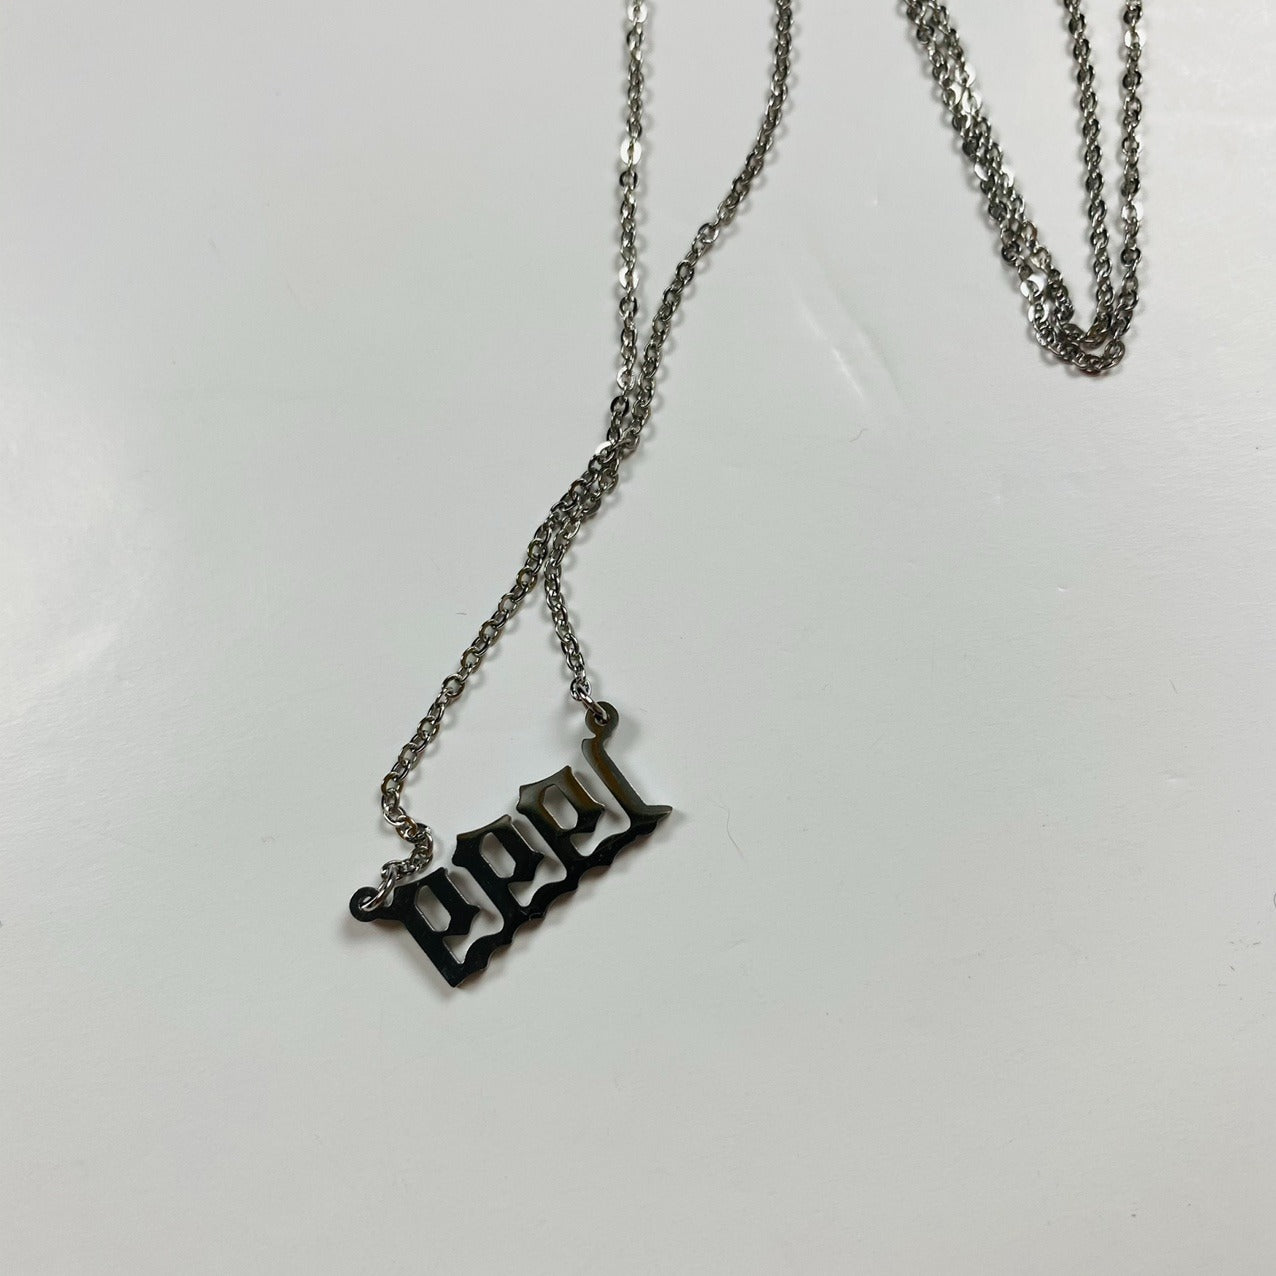 1999 Birth Year Necklace Chain Silver